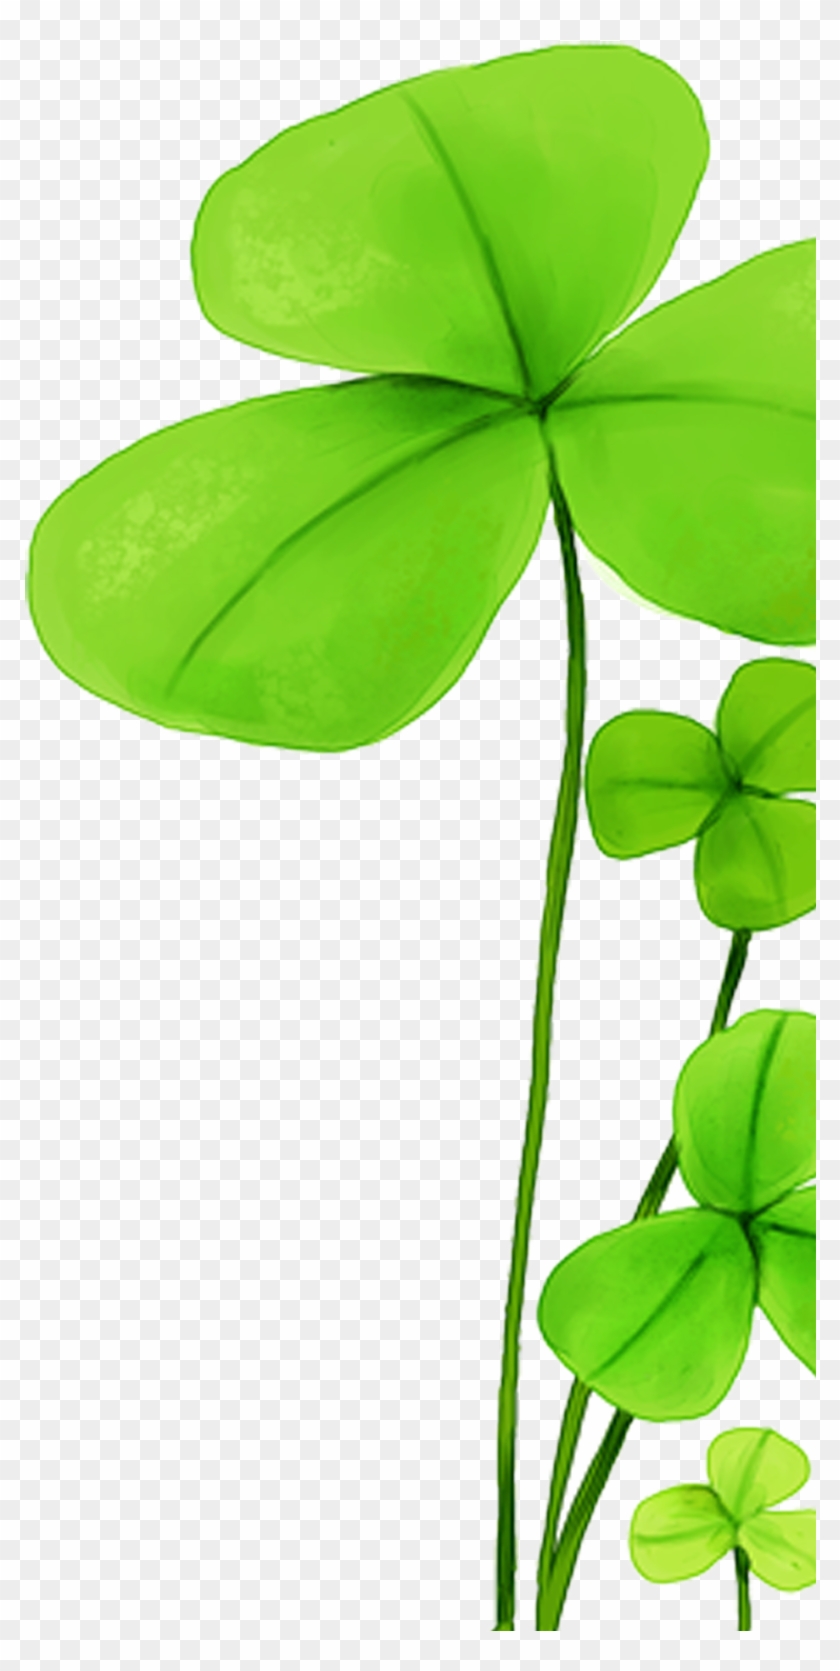 Clover Hd Clips 887*1732 Transprent Png Free Download - Clover Hd Clips 887*1732 Transprent Png Free Download #271646